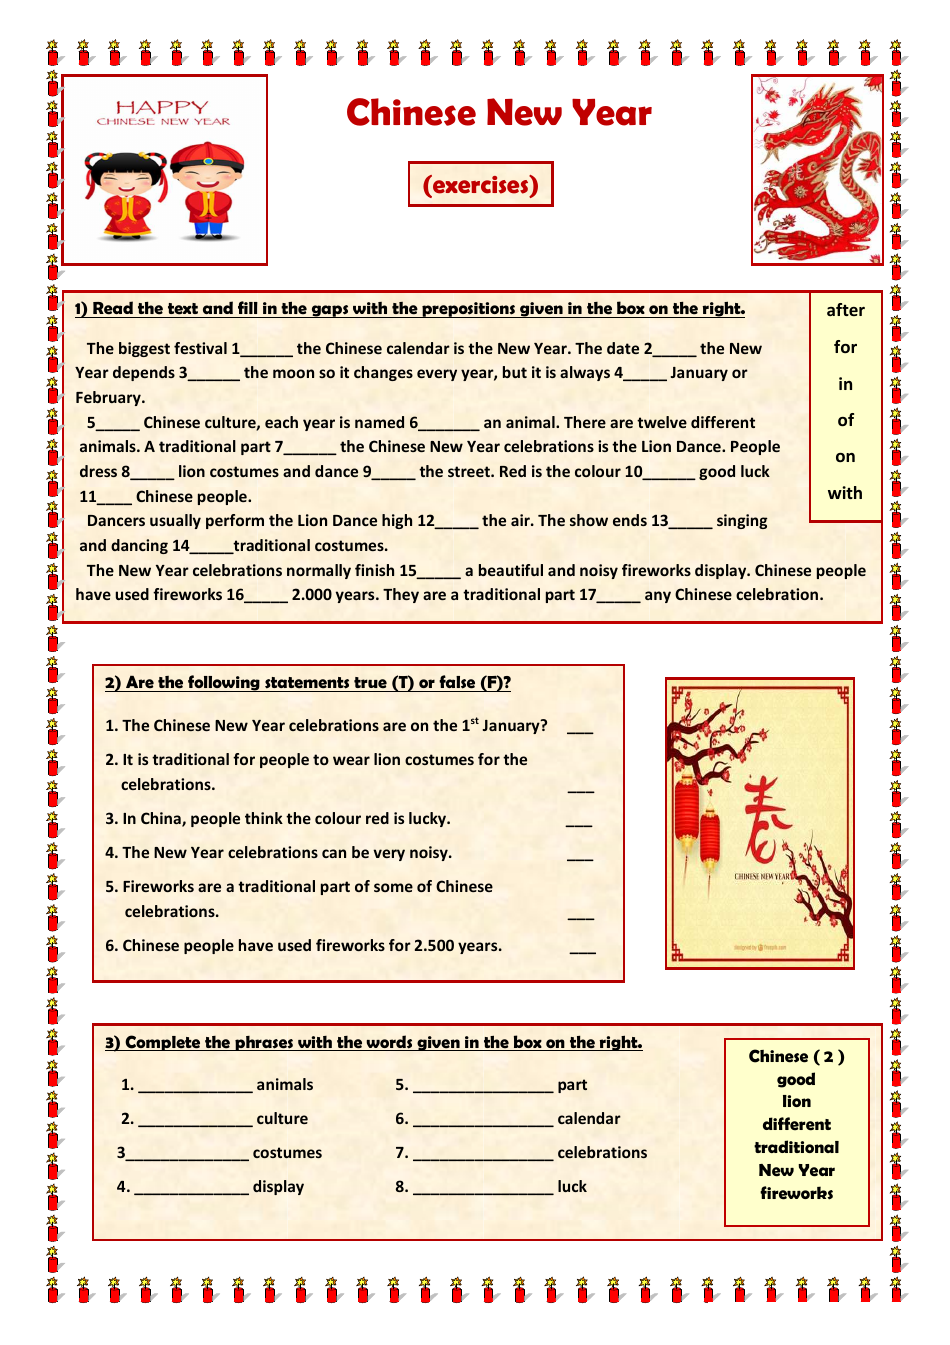 Chinese New Year Exercises - Printable Template image